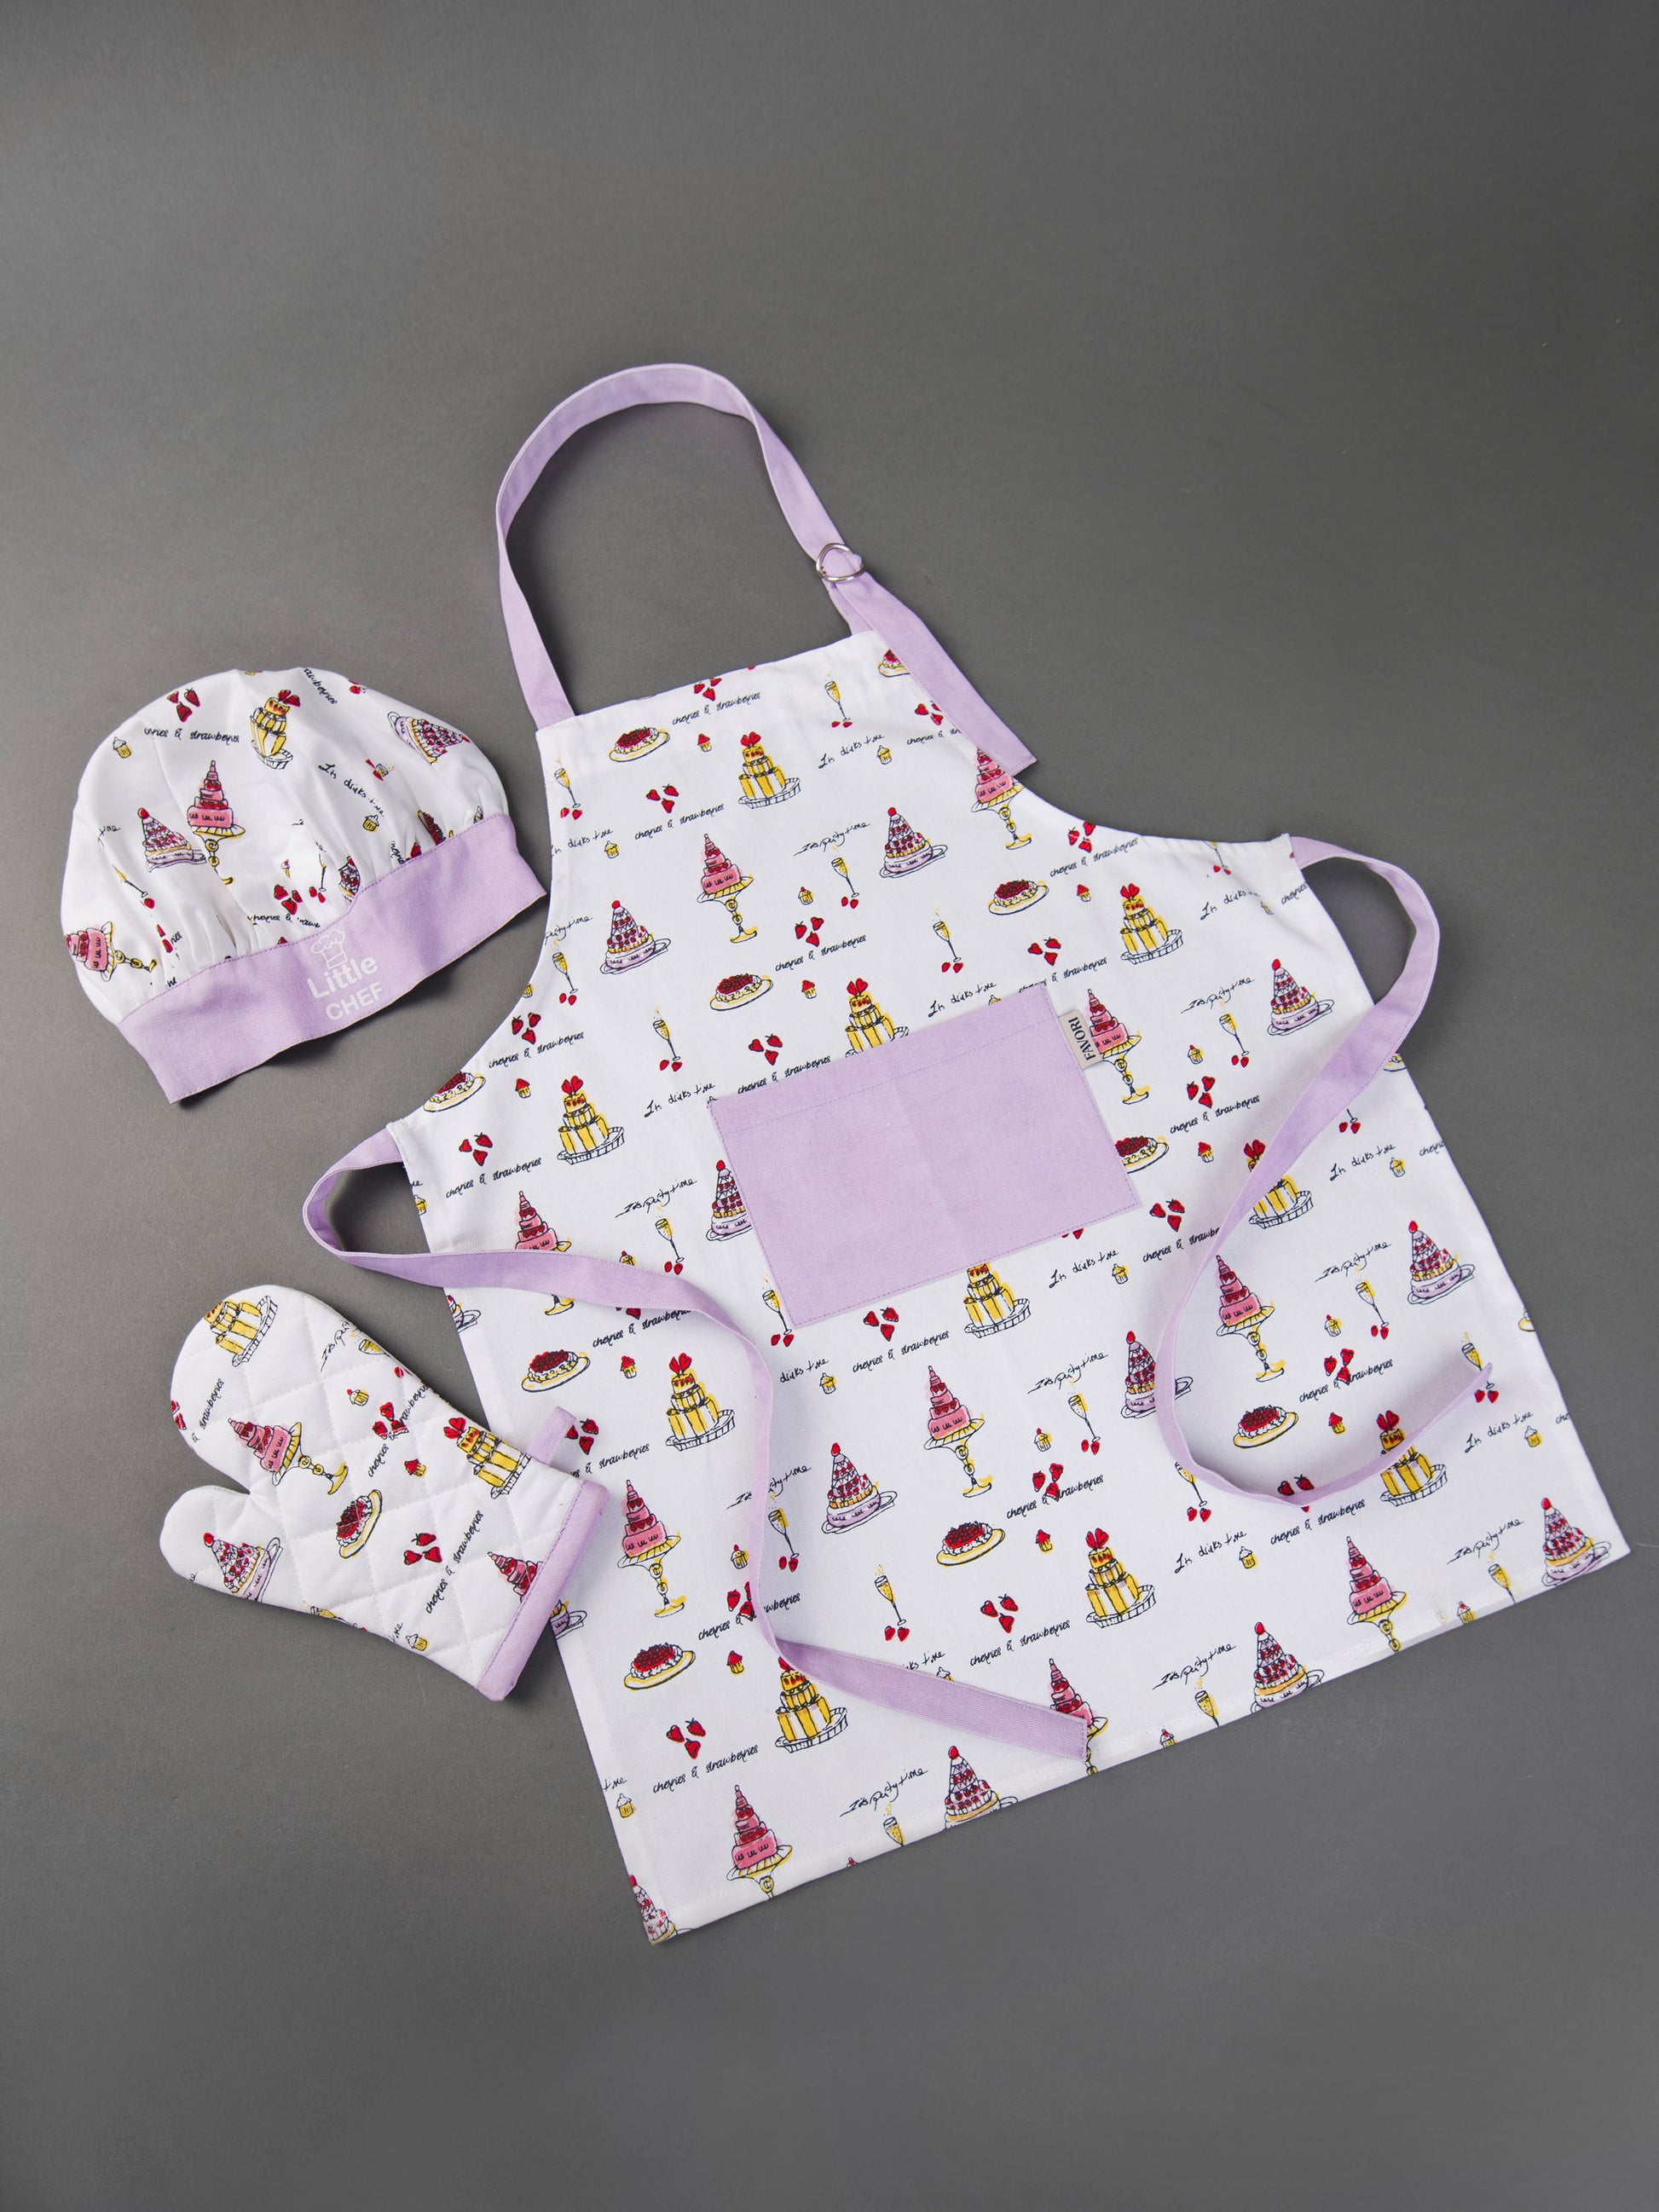 Apron set for Kids in adorable print